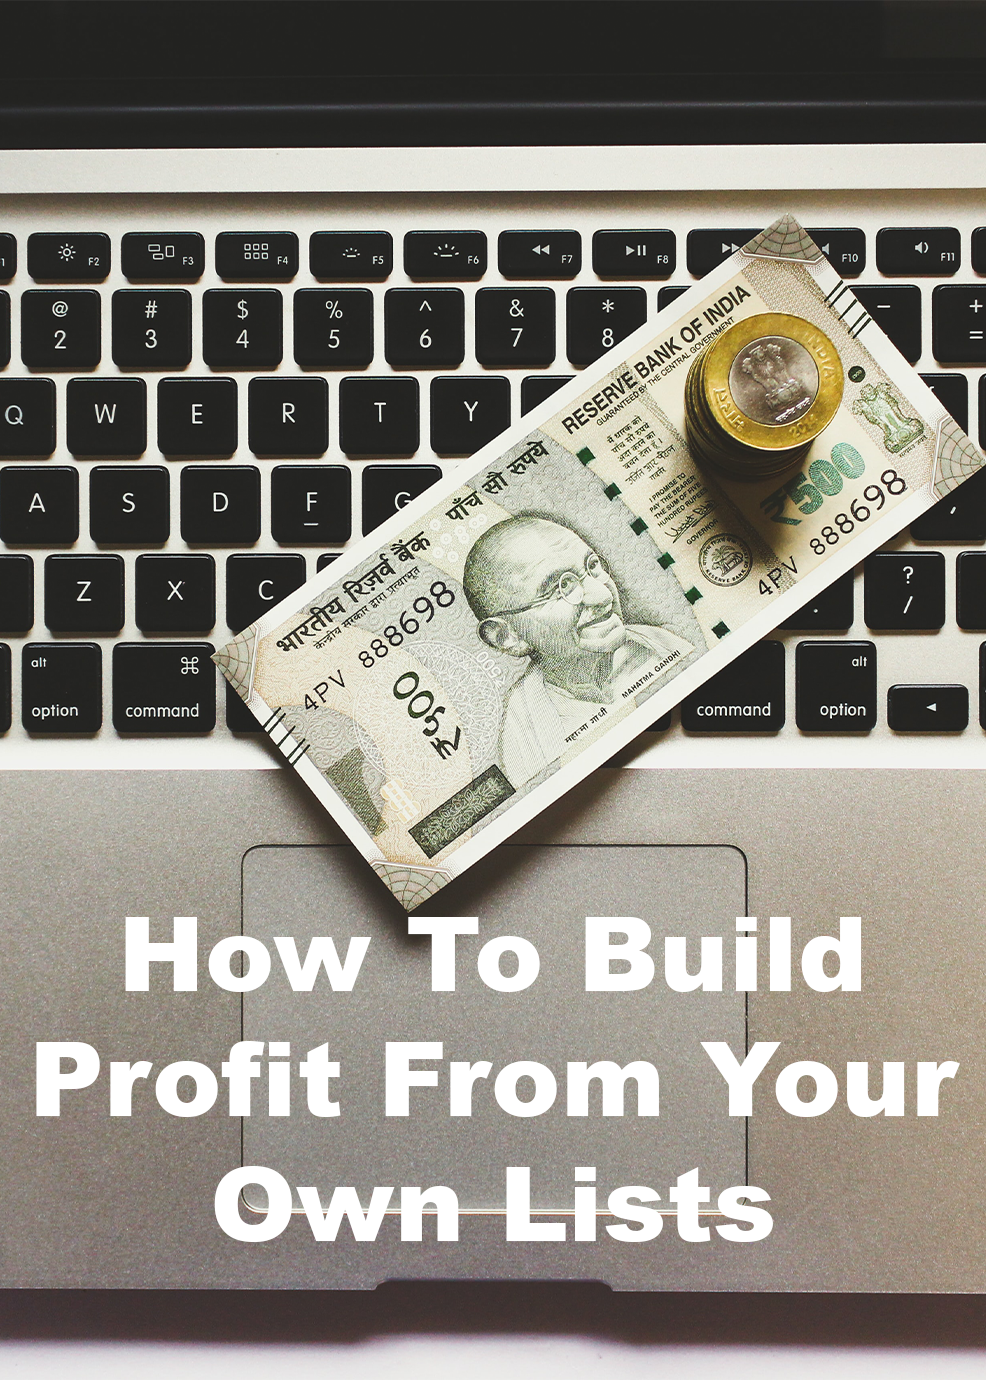 How To Build and Profit from Your Own Lists